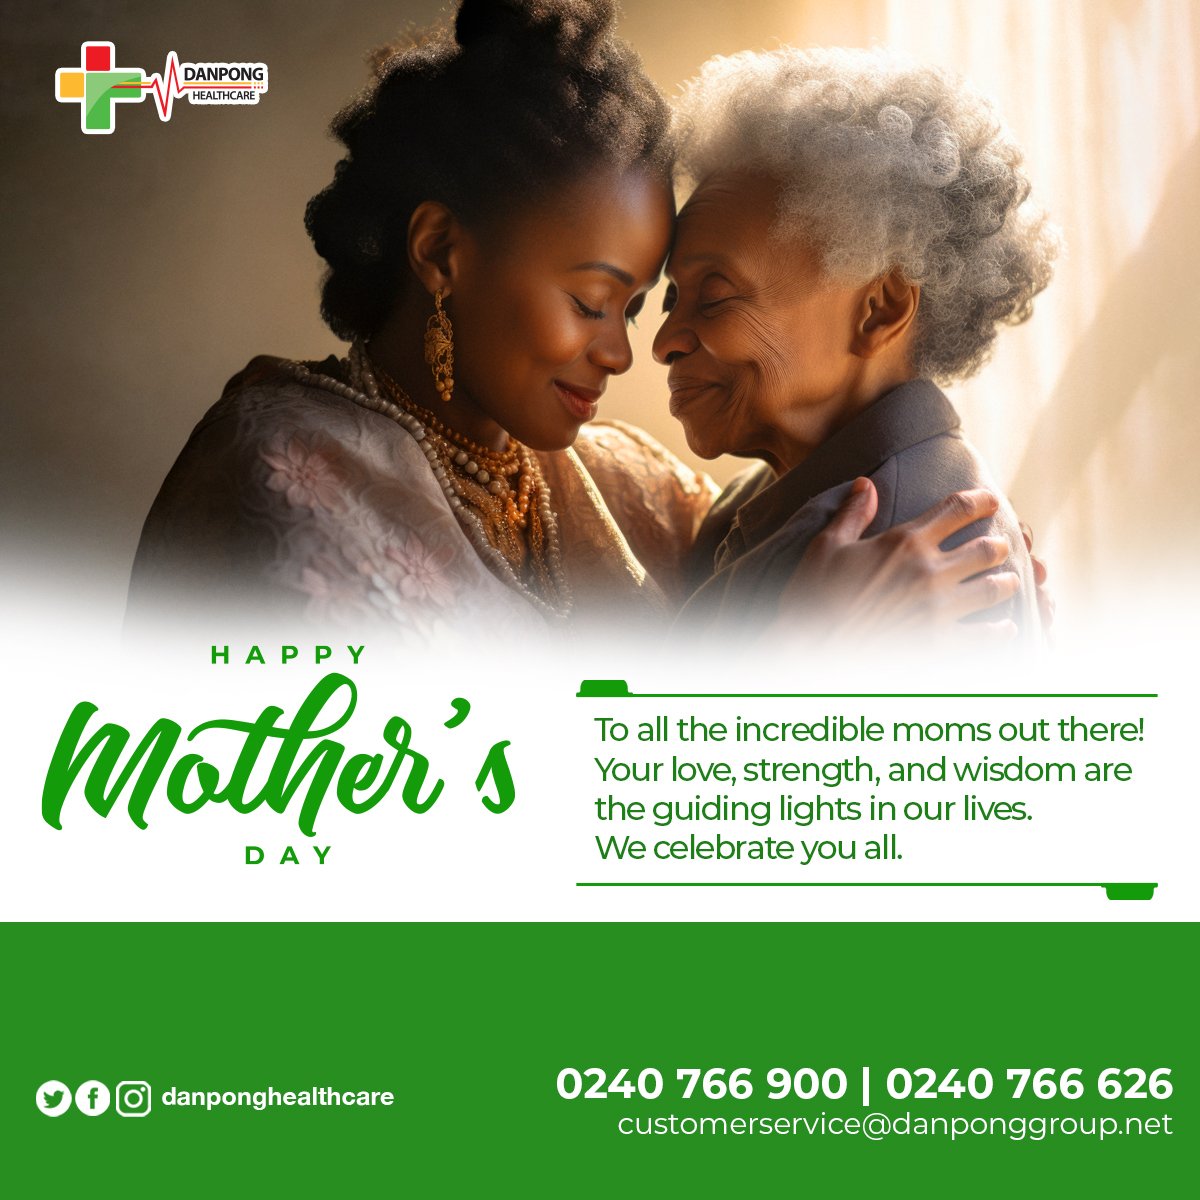 HAPPY MOTHER'S DAY
To all the incredible moms out there! Your love, strength, and wisdom are the guiding lights in our lives. We celebrate you all.
From all of us at Danpong Healthcare
#Healthandhappy
#Danpongcares
#mothers
#HappyMothersDay